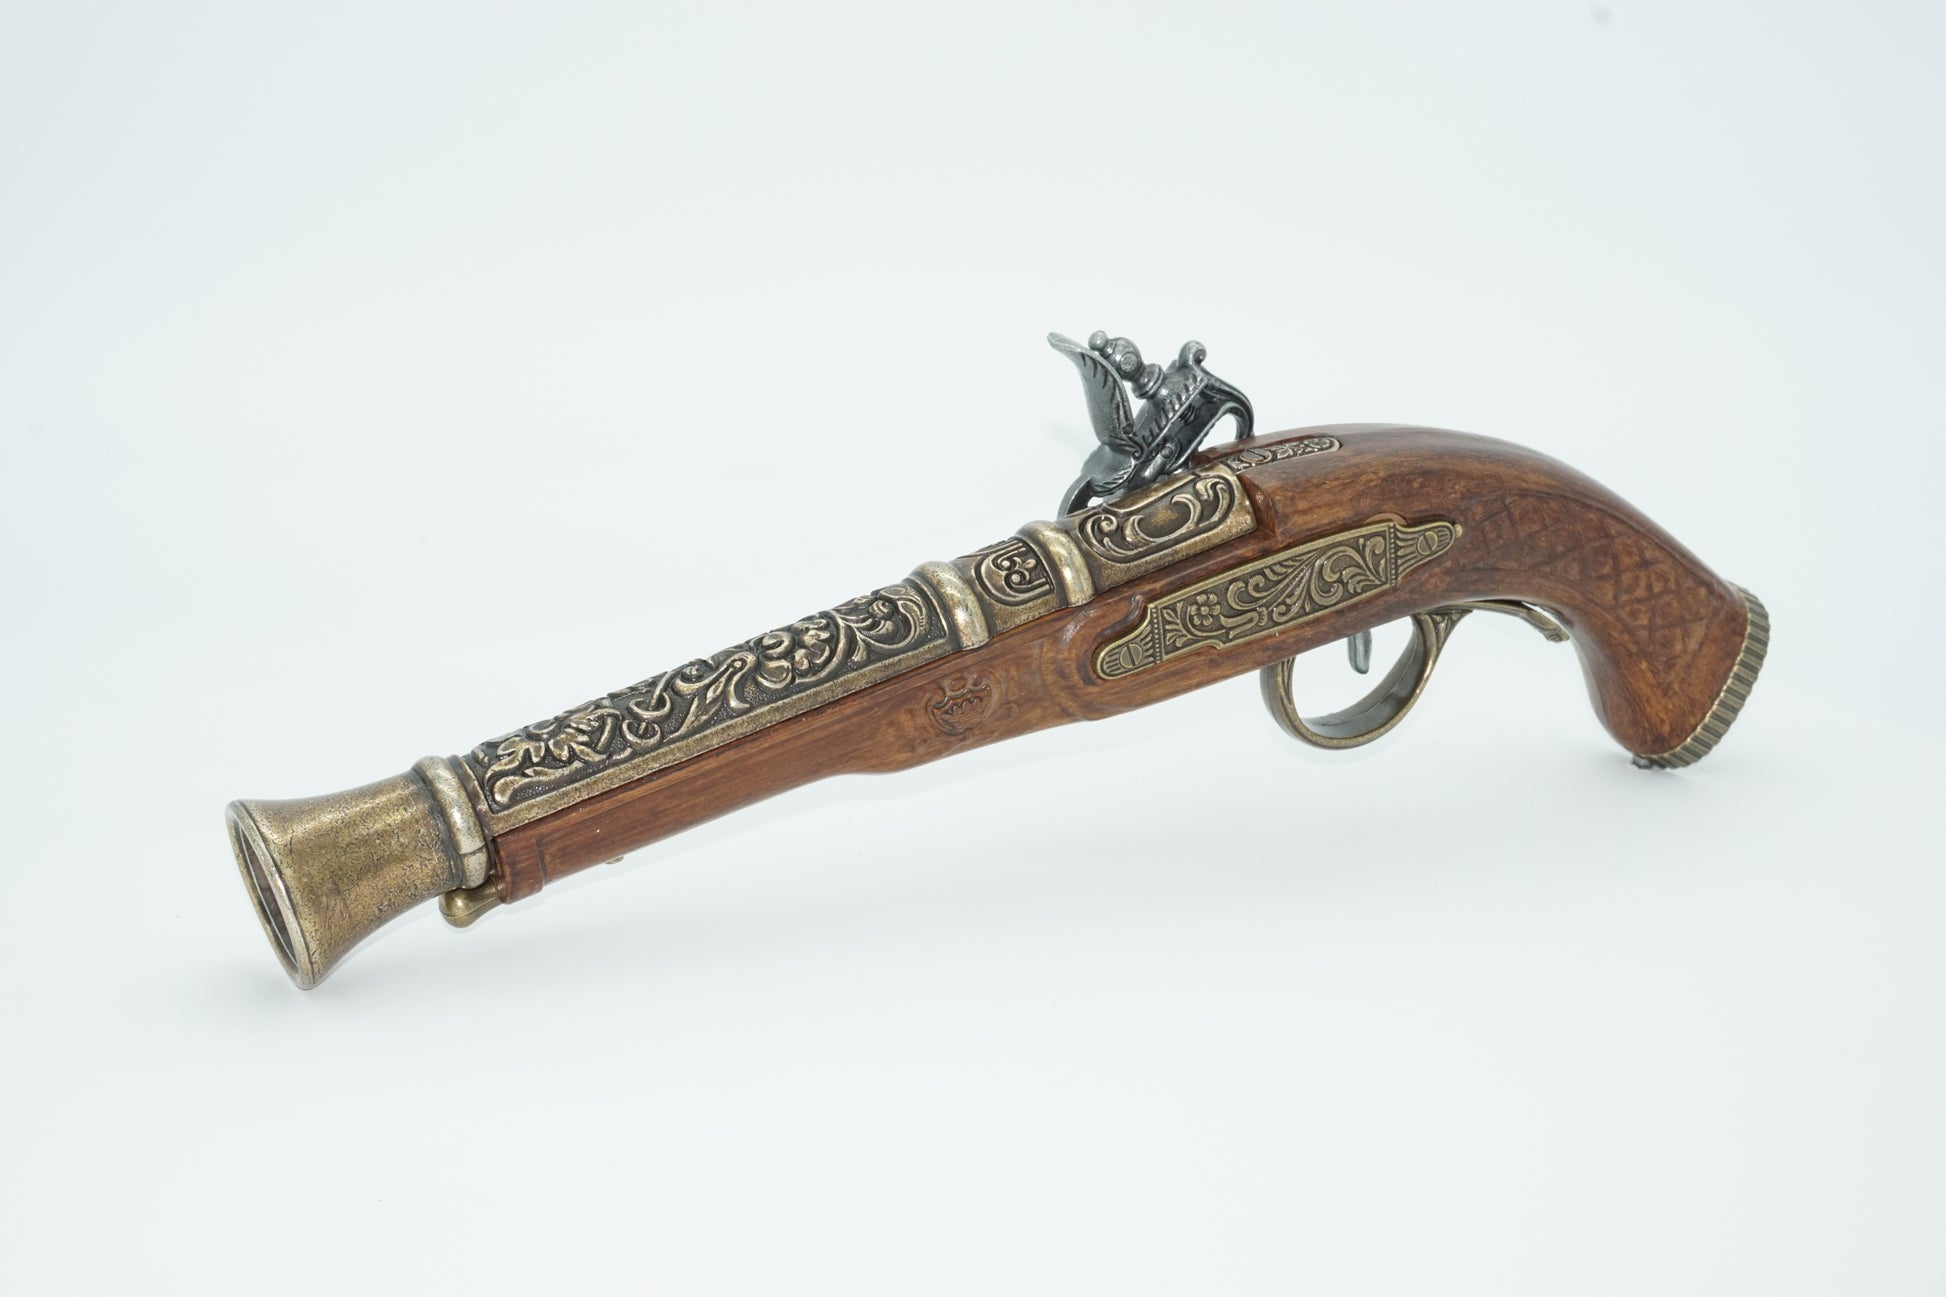 Left side view of dueling pistol with brass barrel and silver firing pin. This pistol comes in a set of two and a cardboard decorative display box not shown.